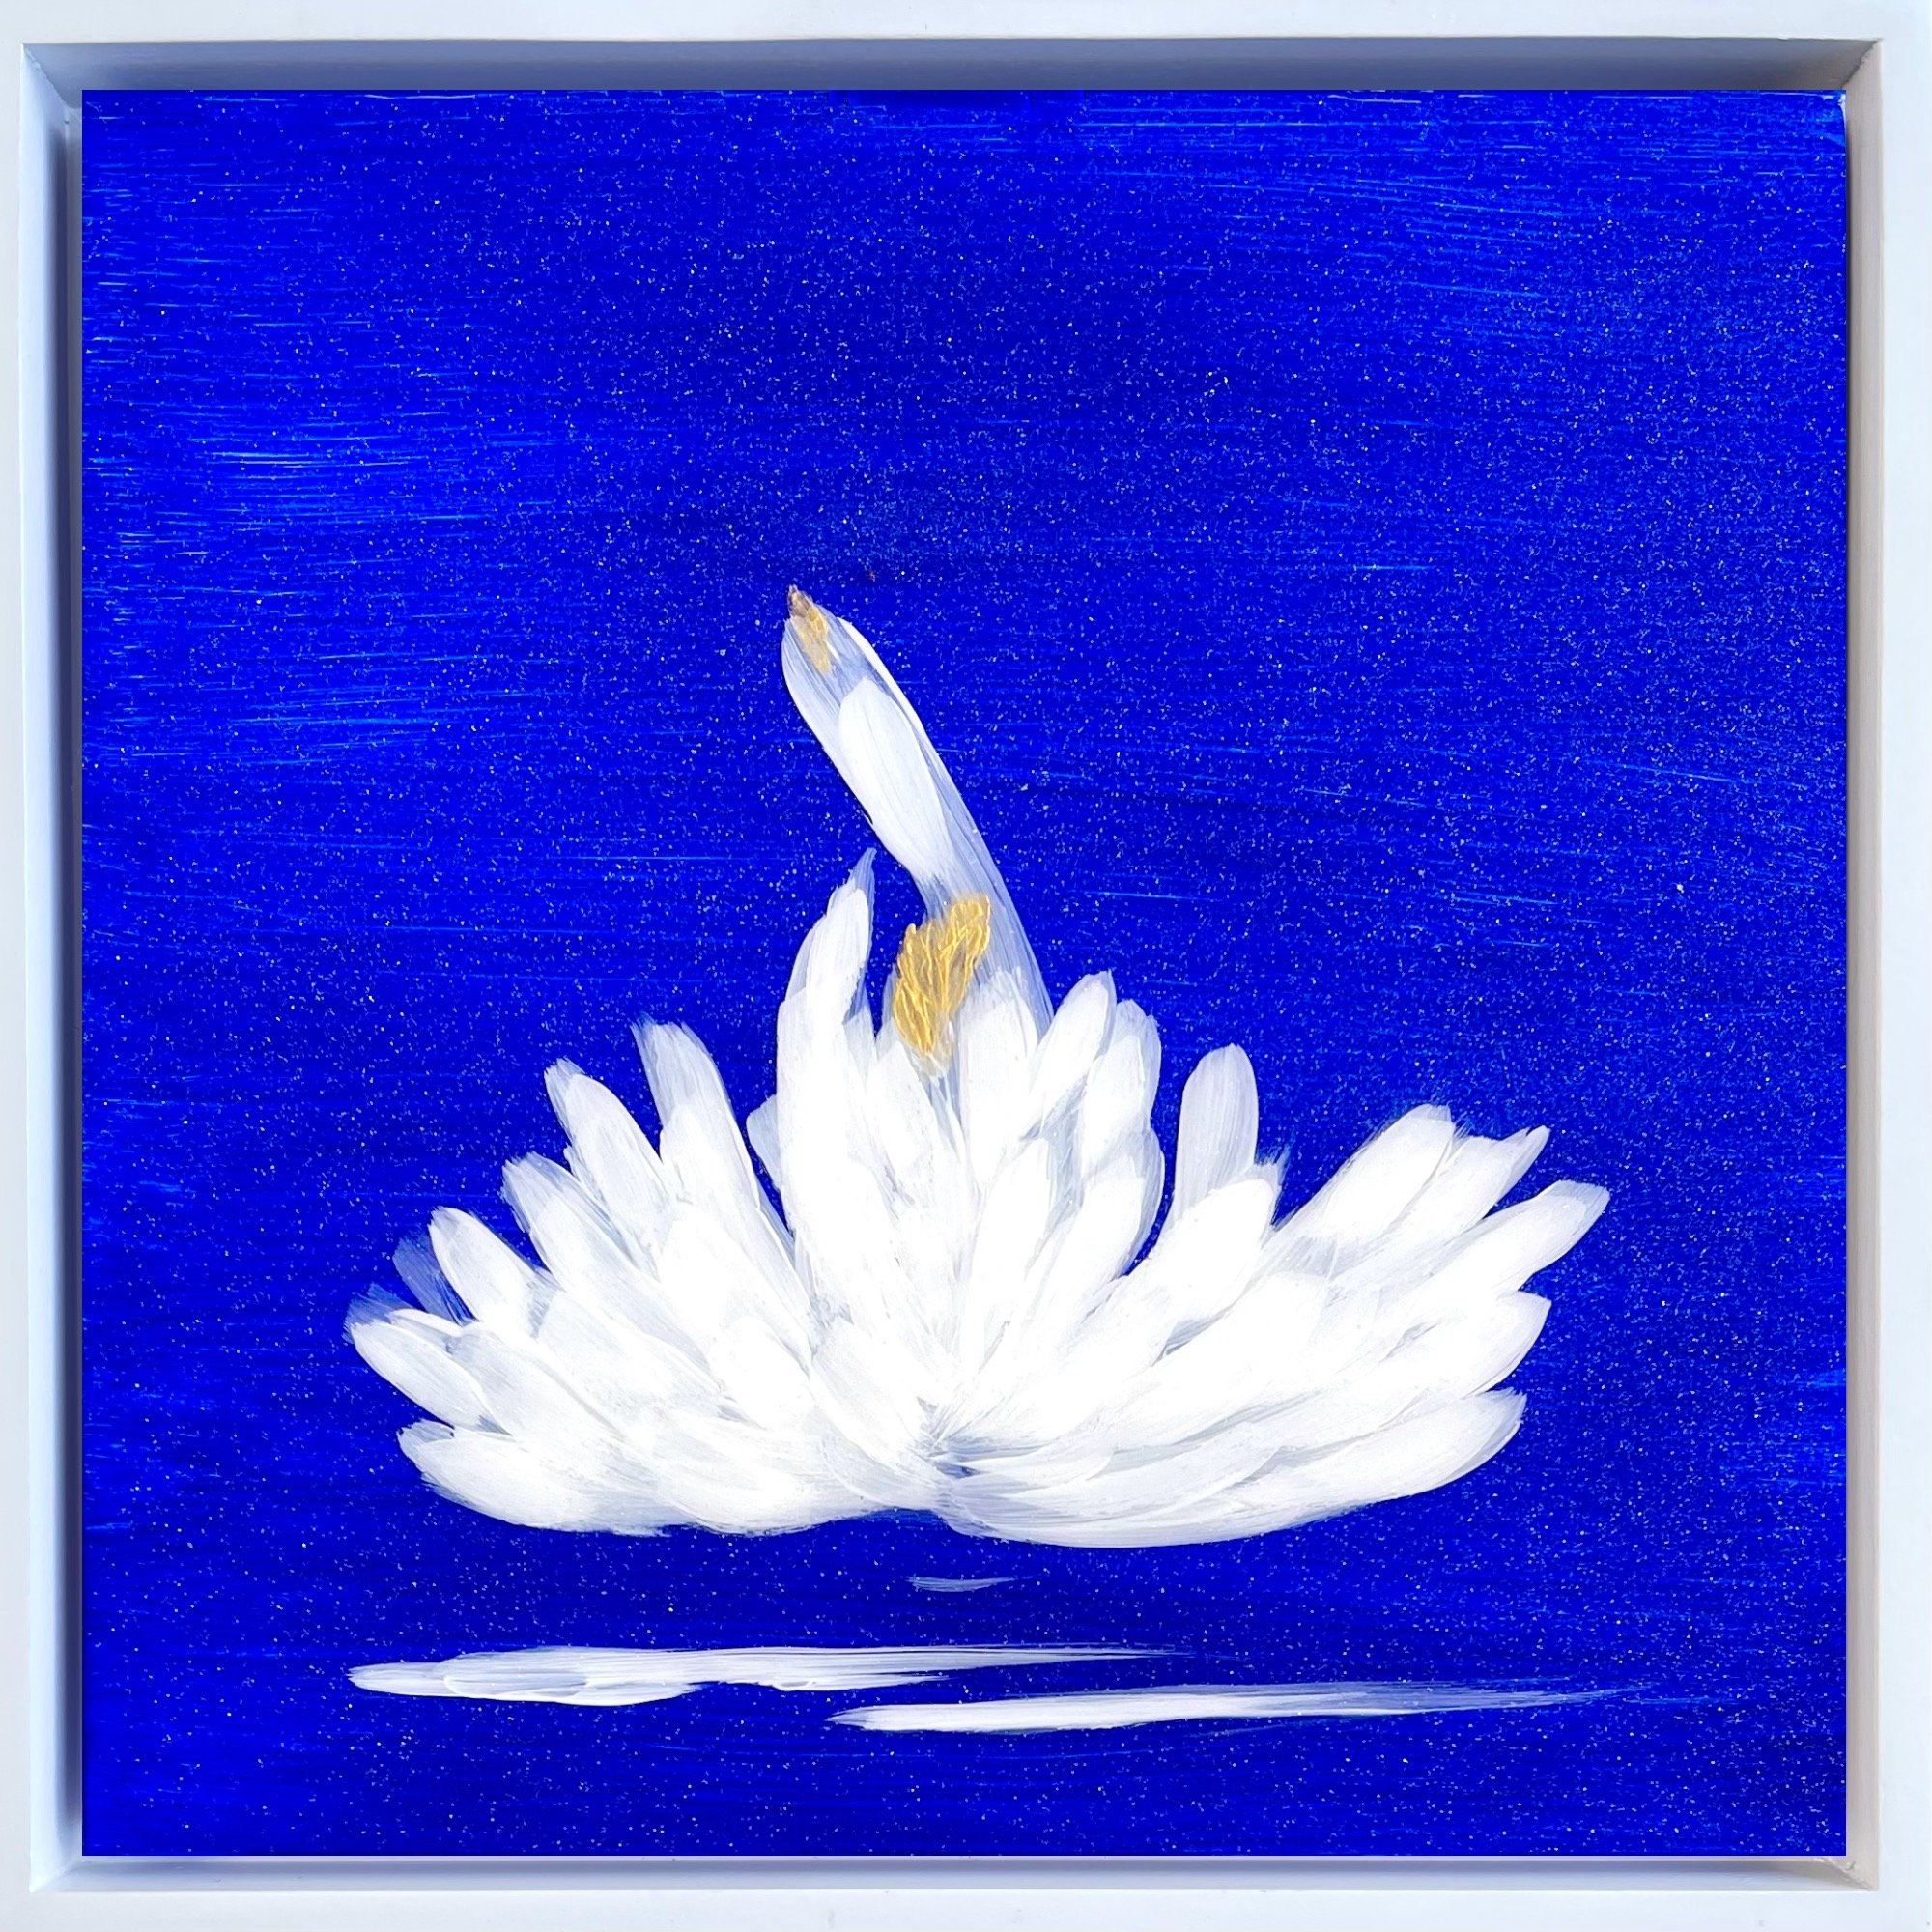 The Blue Garden Lily I